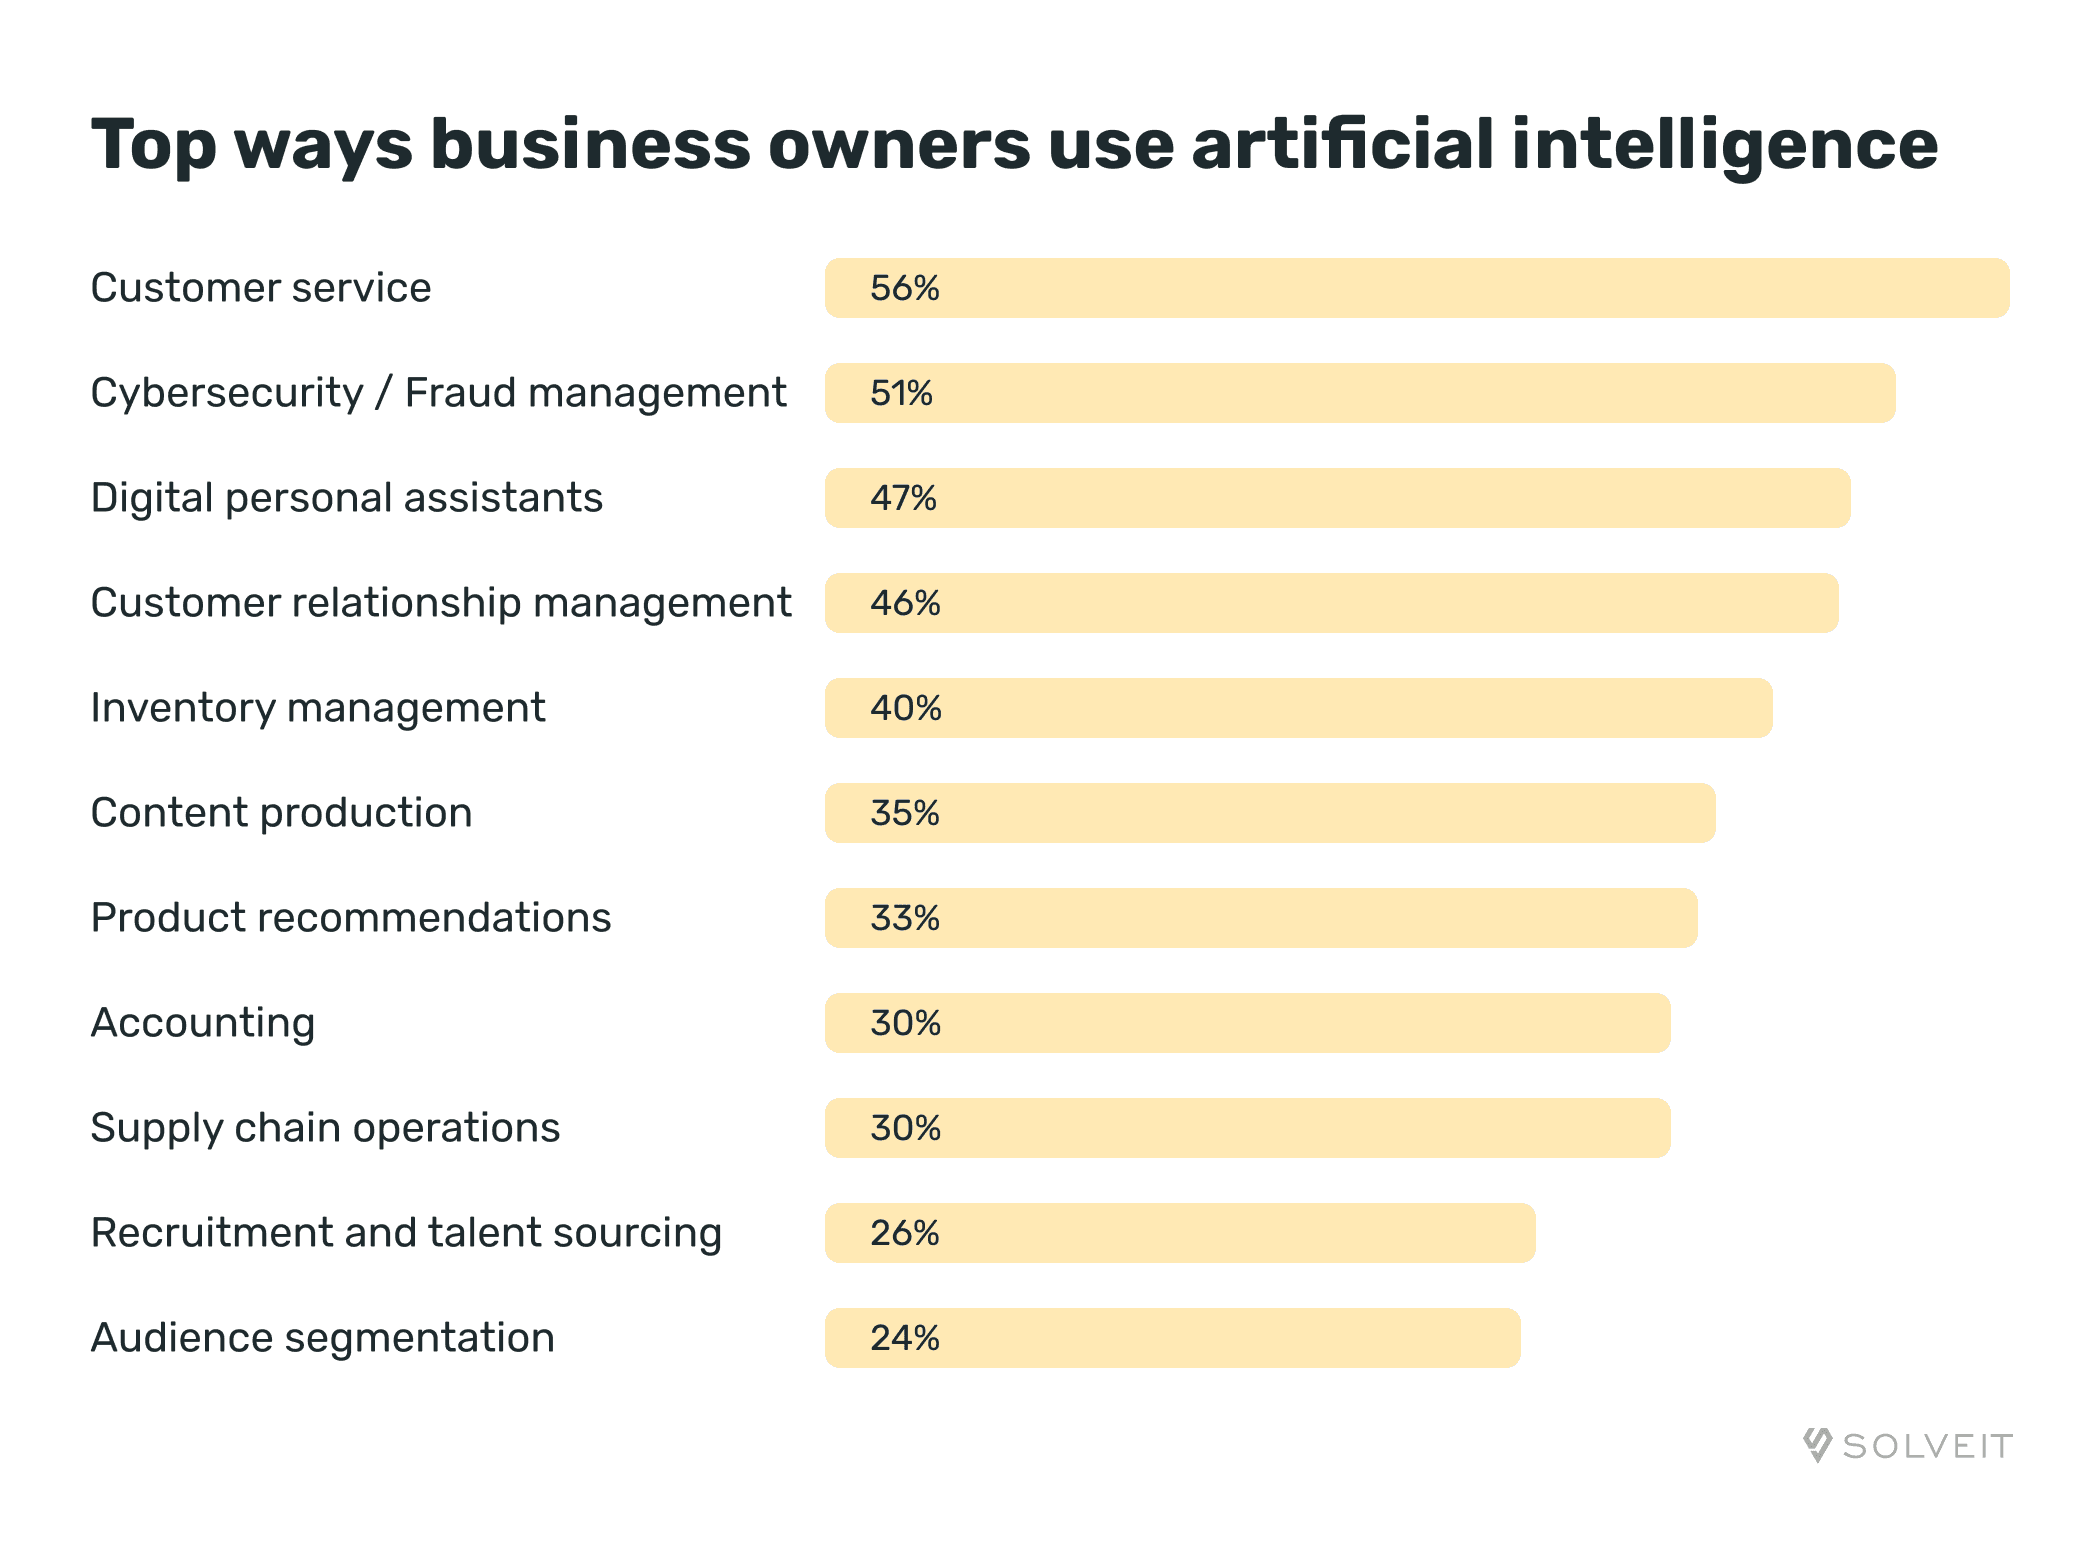 Top Ways Business Owners Use AI